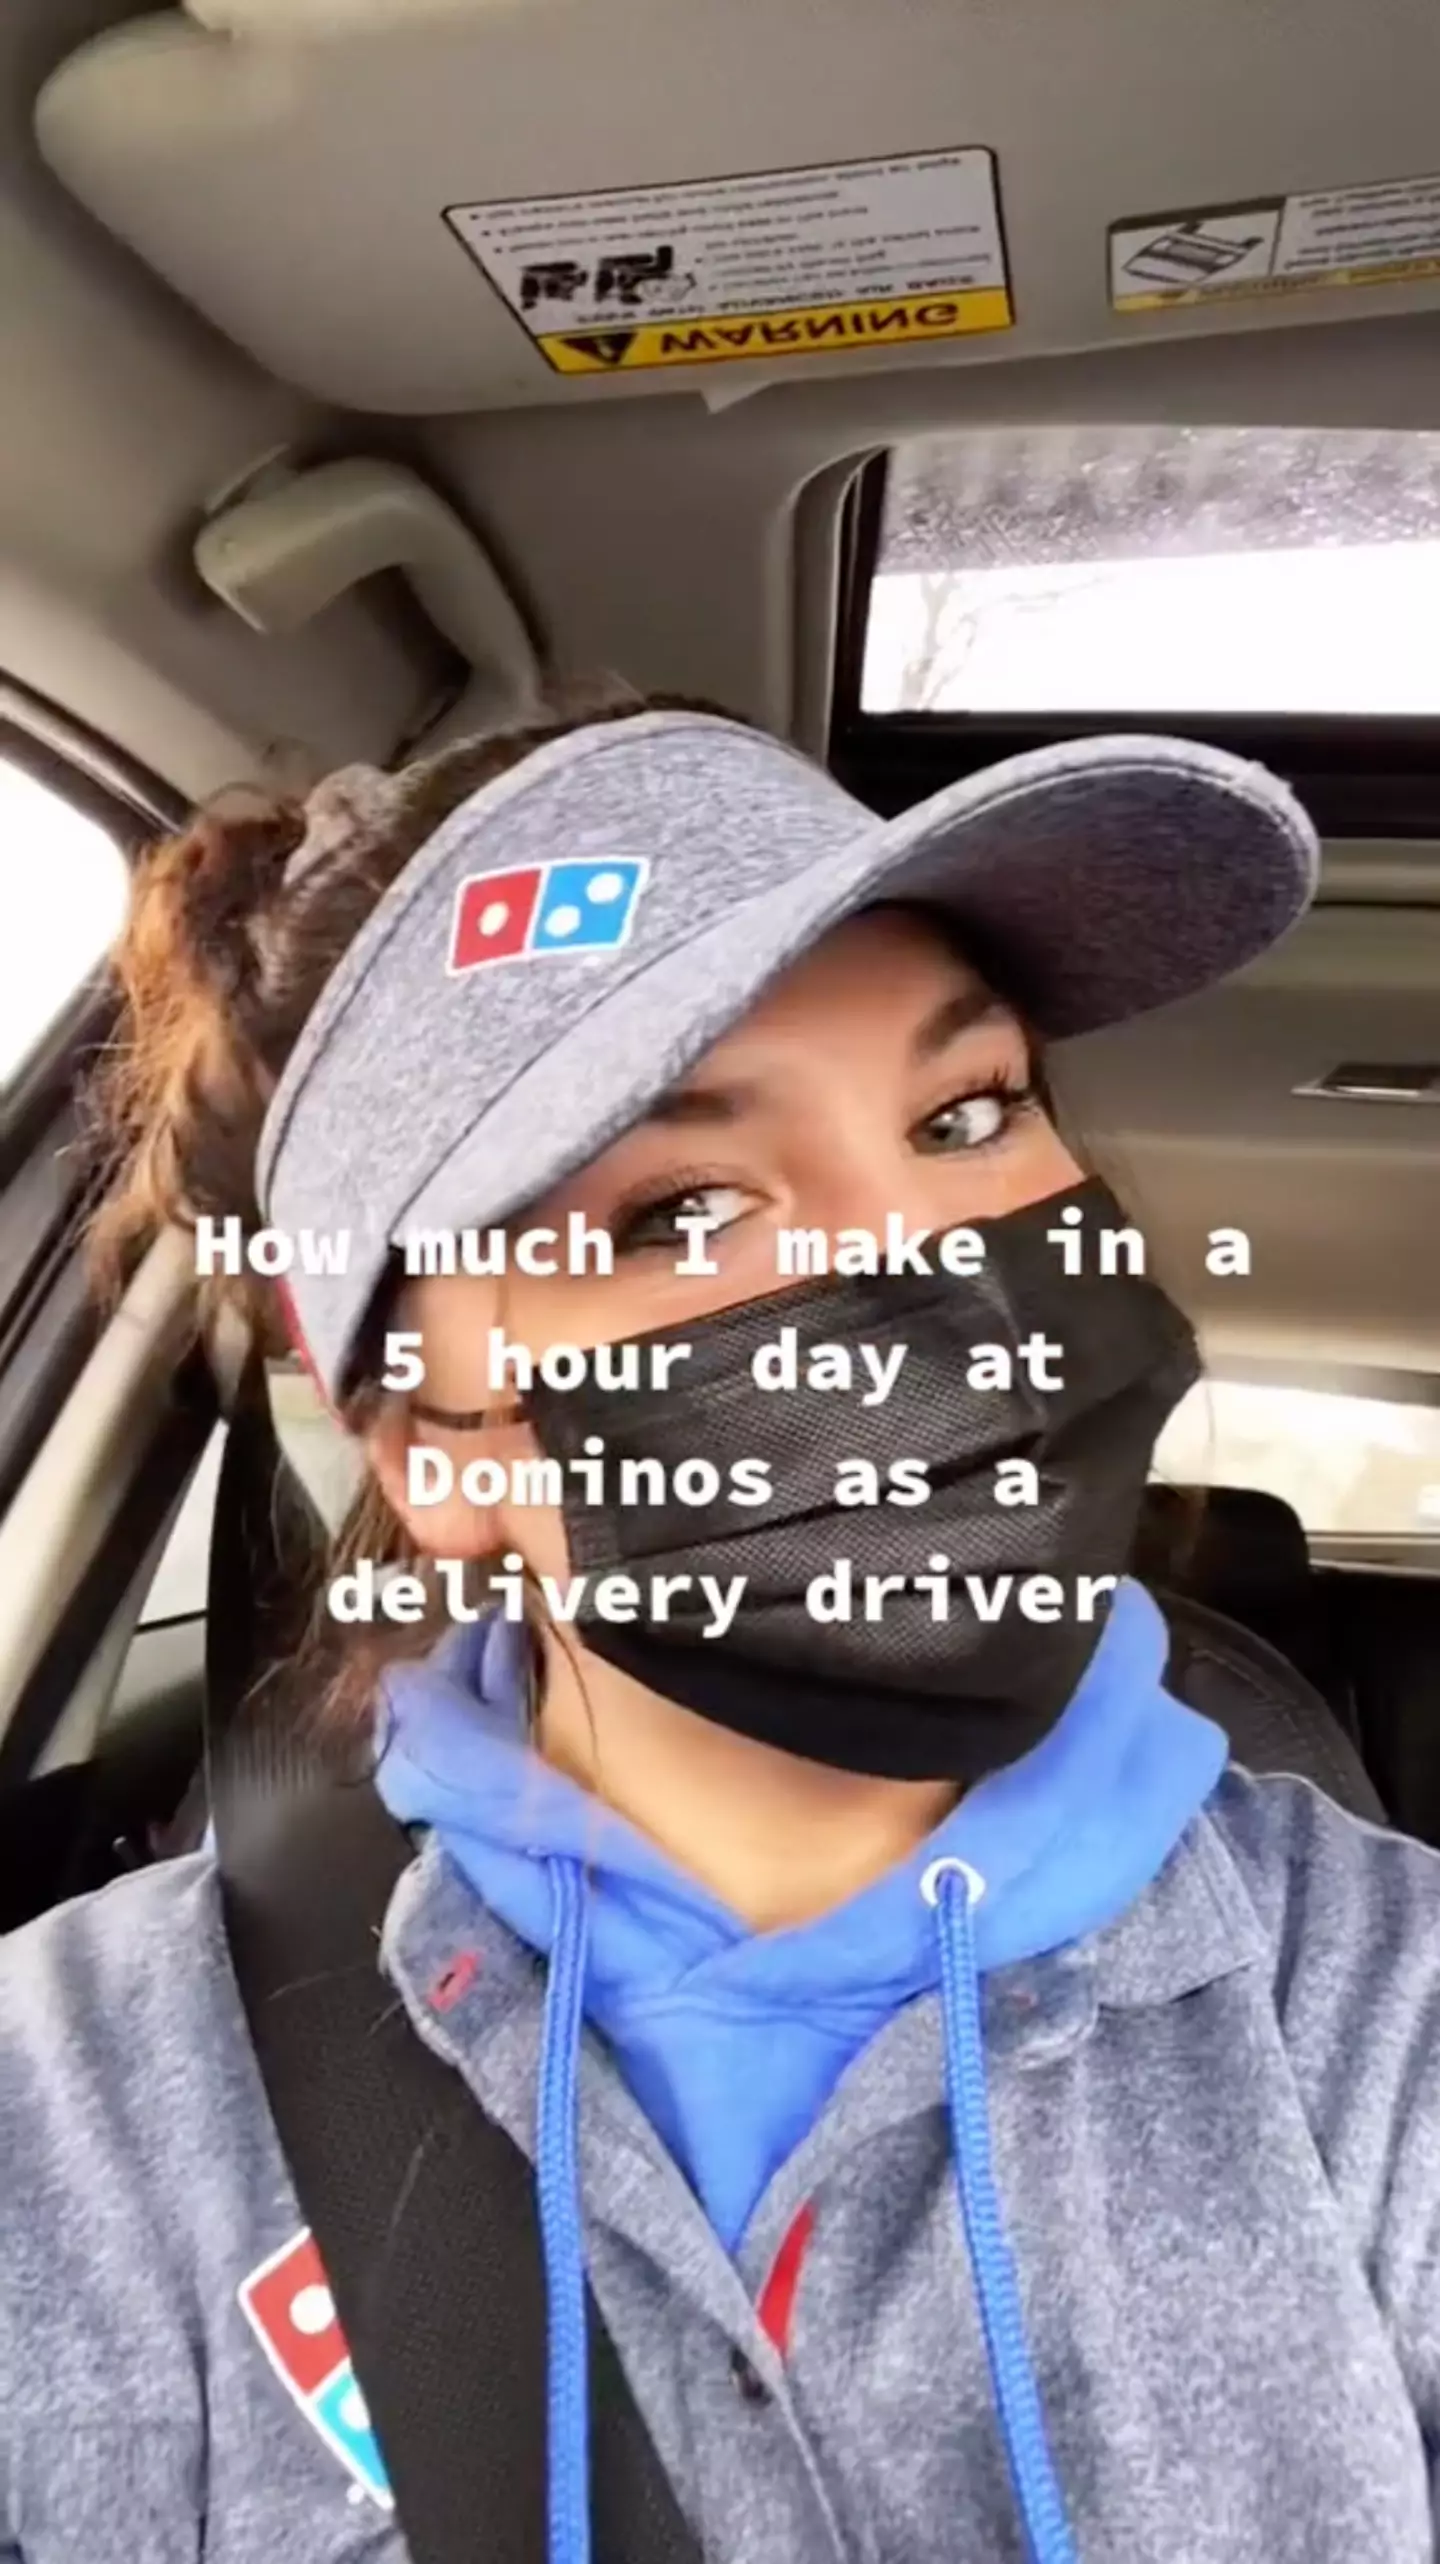 In the video she explains how much she can take home in a five-hour shift.